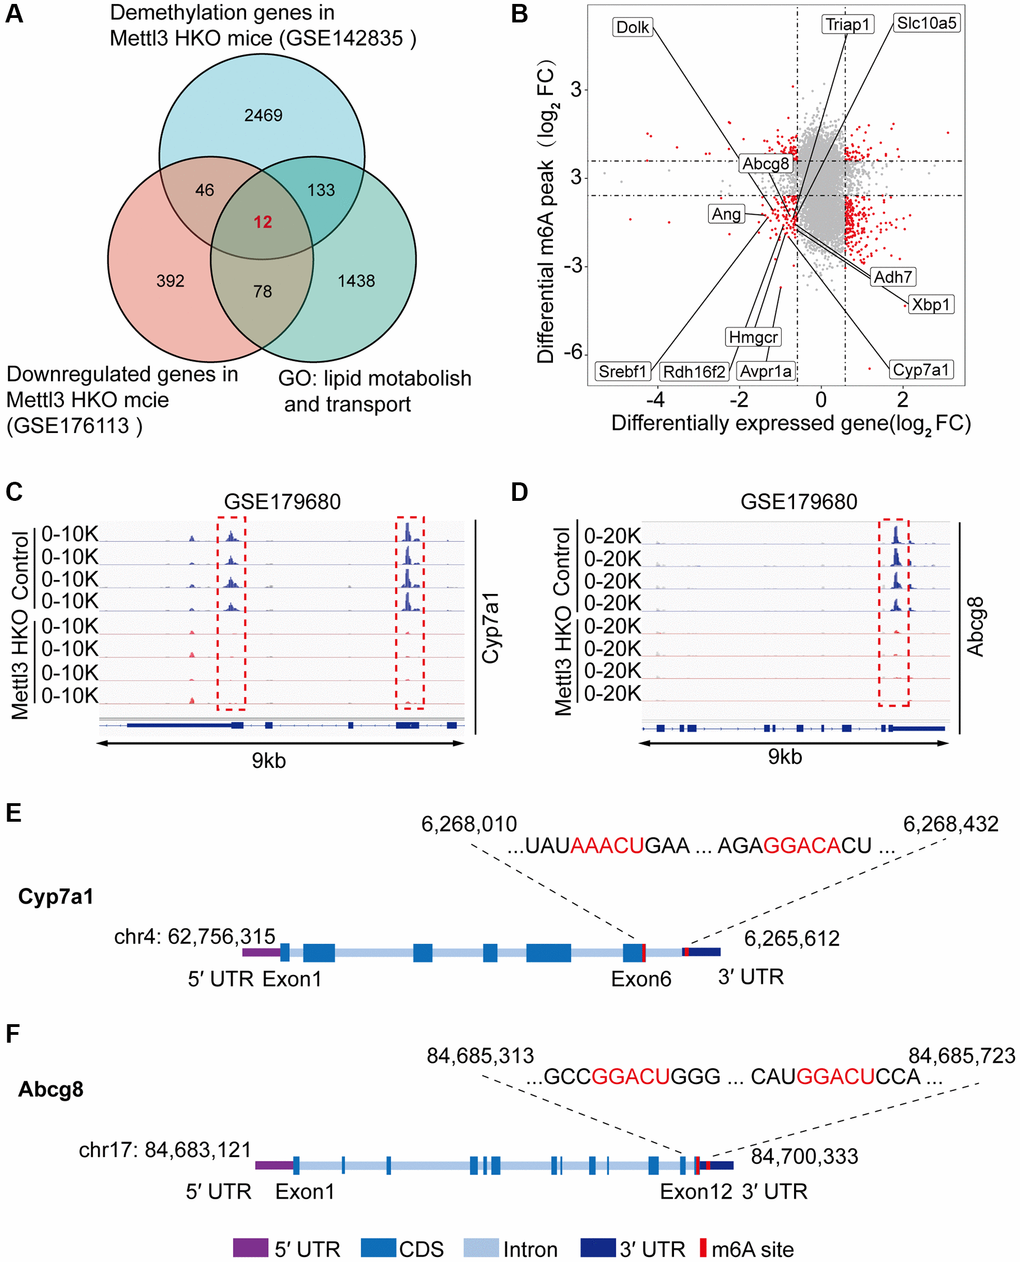 Multiple omics analyses identify the specific targets of lipid disorder caused by Mettl3-mediated m6A modification. (A) Venn diagram showing the number of overlapping Hypo-m6A-methylated mRNAs and downregulated genes in the liver of METTL3 HKO mice. Then the resultant 58 genes were annotated to GO term lipid metabolism and transport and obtained 12 genes. (B) Four-quadrant diagram showing the differentially methylated genes and differentially expressed genes in GSE142835 and GSE176113. (C, D) Peak distribution normalized to input in the genomic regions of Cyp7a1 (C) and Abcg8 (D) in control and METTL3 HKO mice in the GSE179680 dataset is shown. (E, F) Schematic representation of predicted positions of m6A motifs within Cyp7a1 (E) and Abcg8 (F) mRNA.